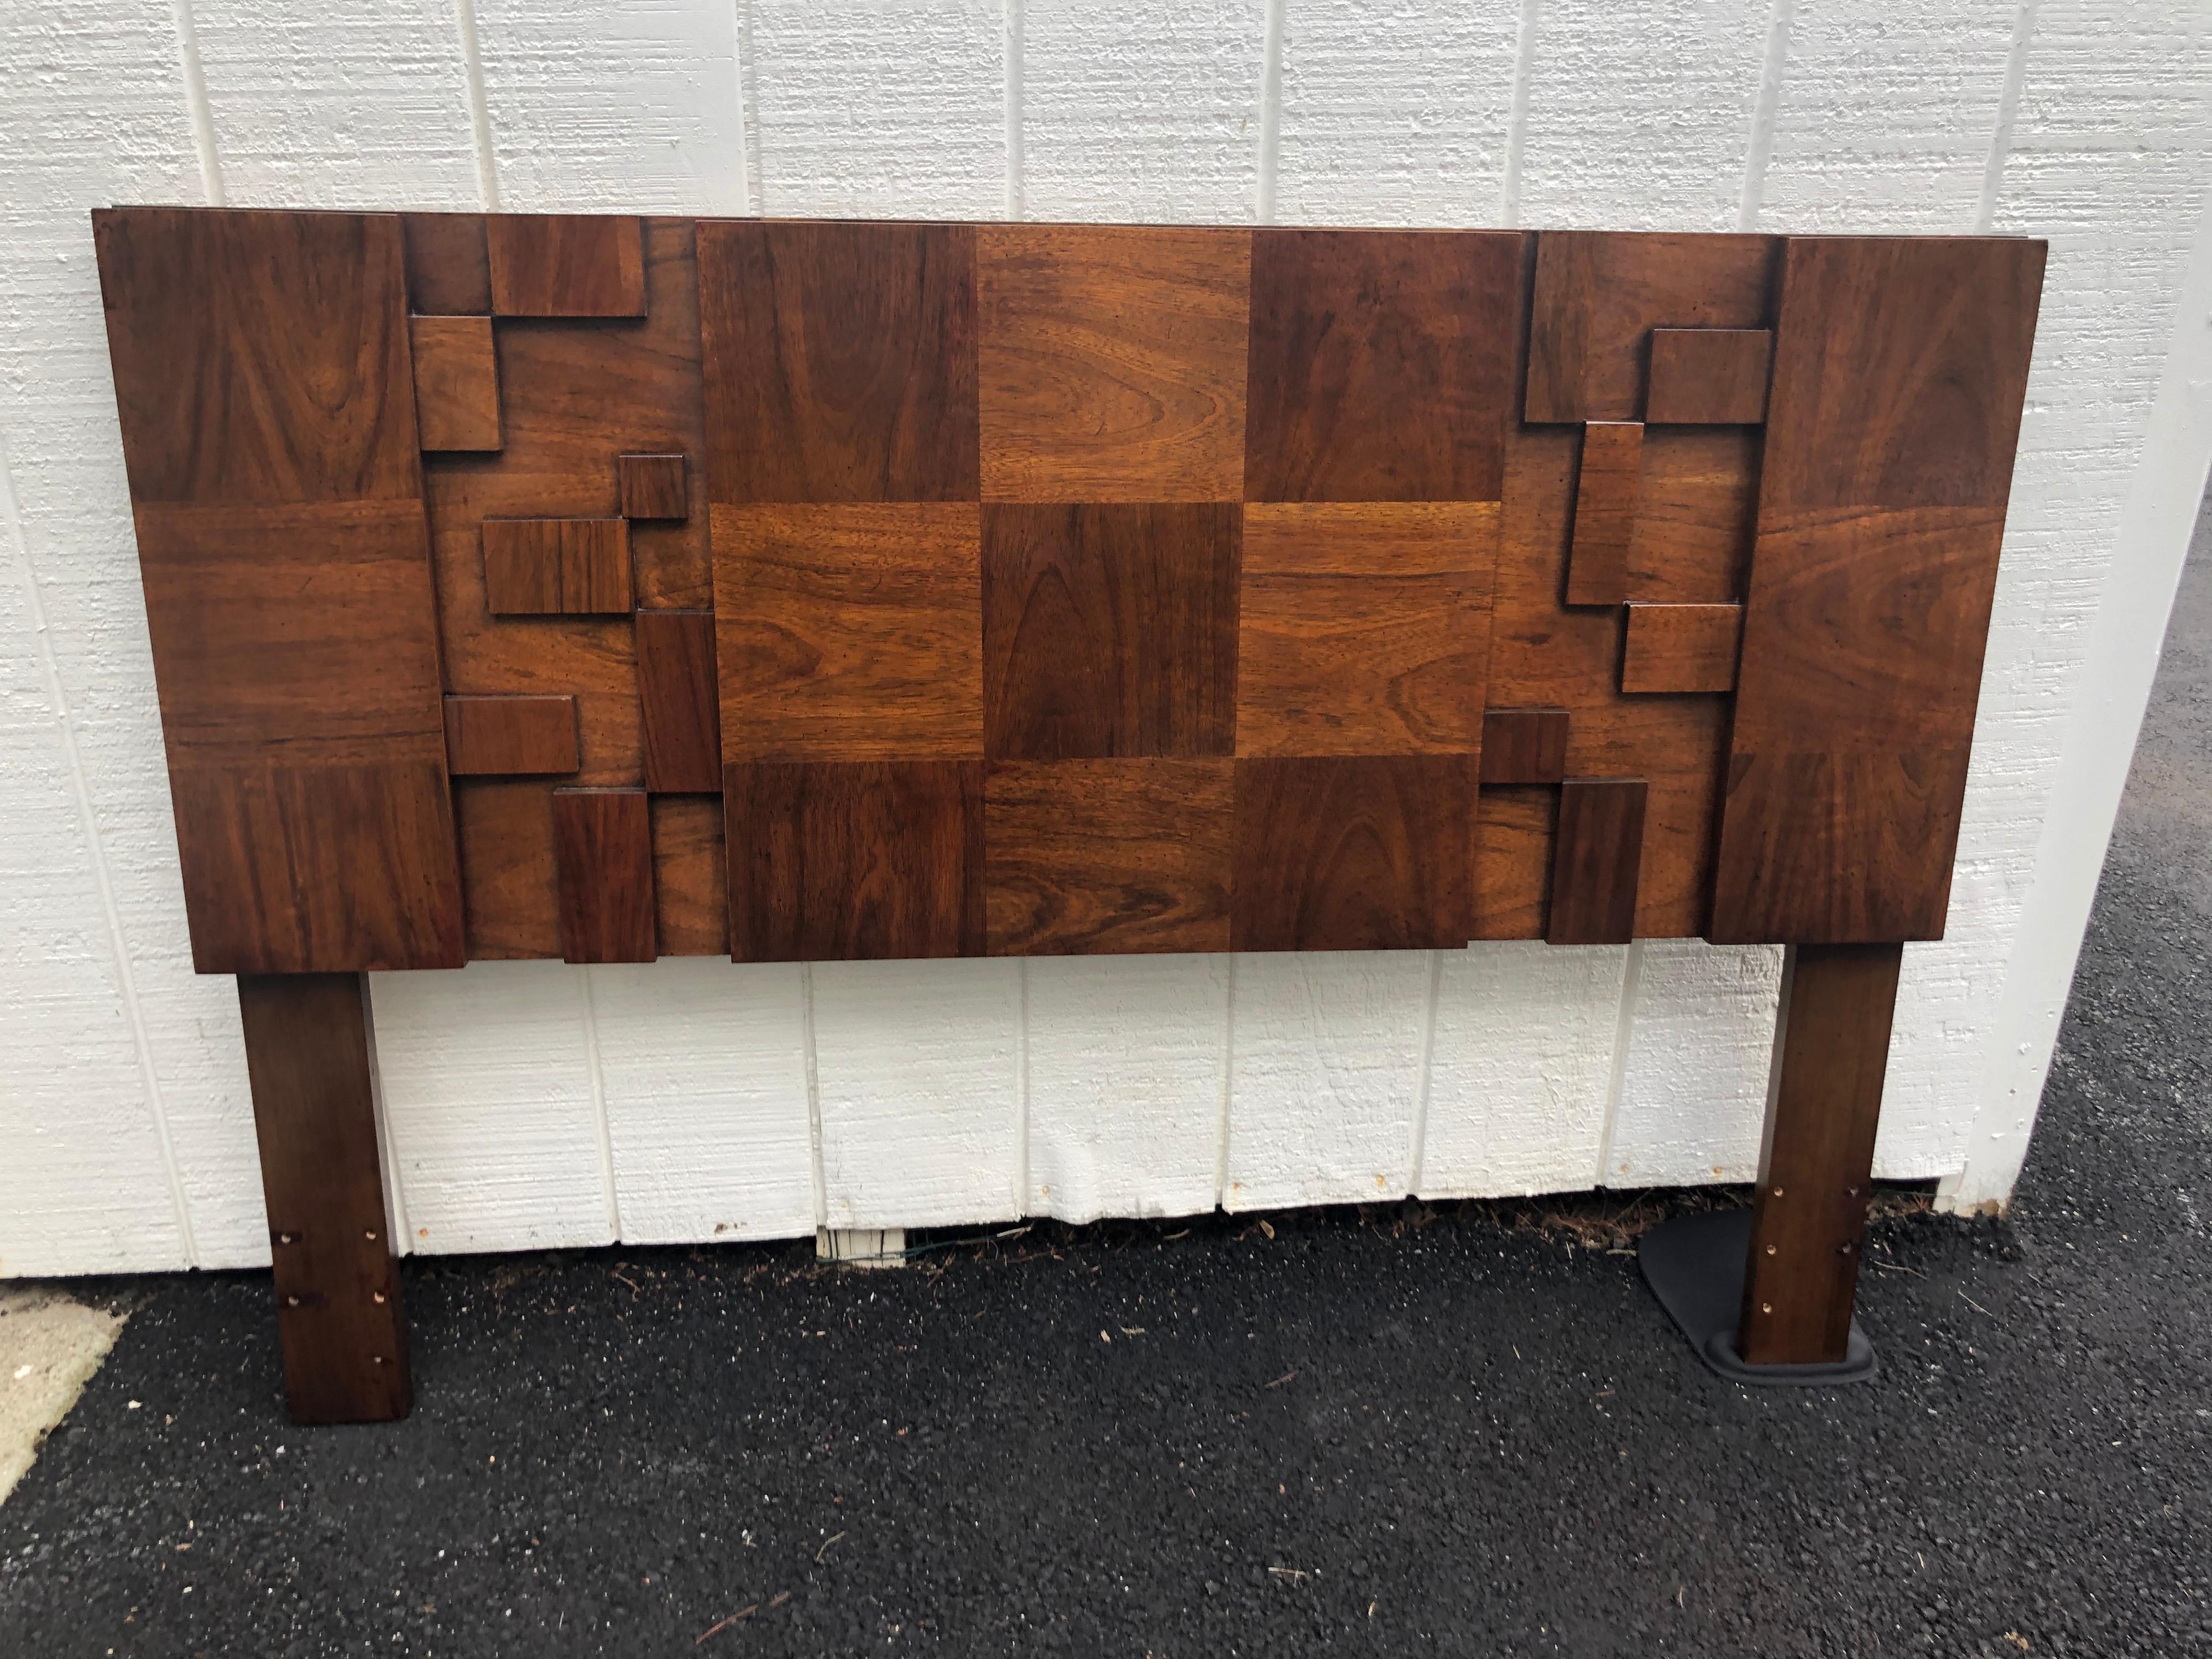 Lane Staccato Brutalist mid century headboard
Hard to find and perfect for that die hard collector or decorator. 
Perfect for that mid century look or boho chic feel.
Can fit with either a full size mattress (54